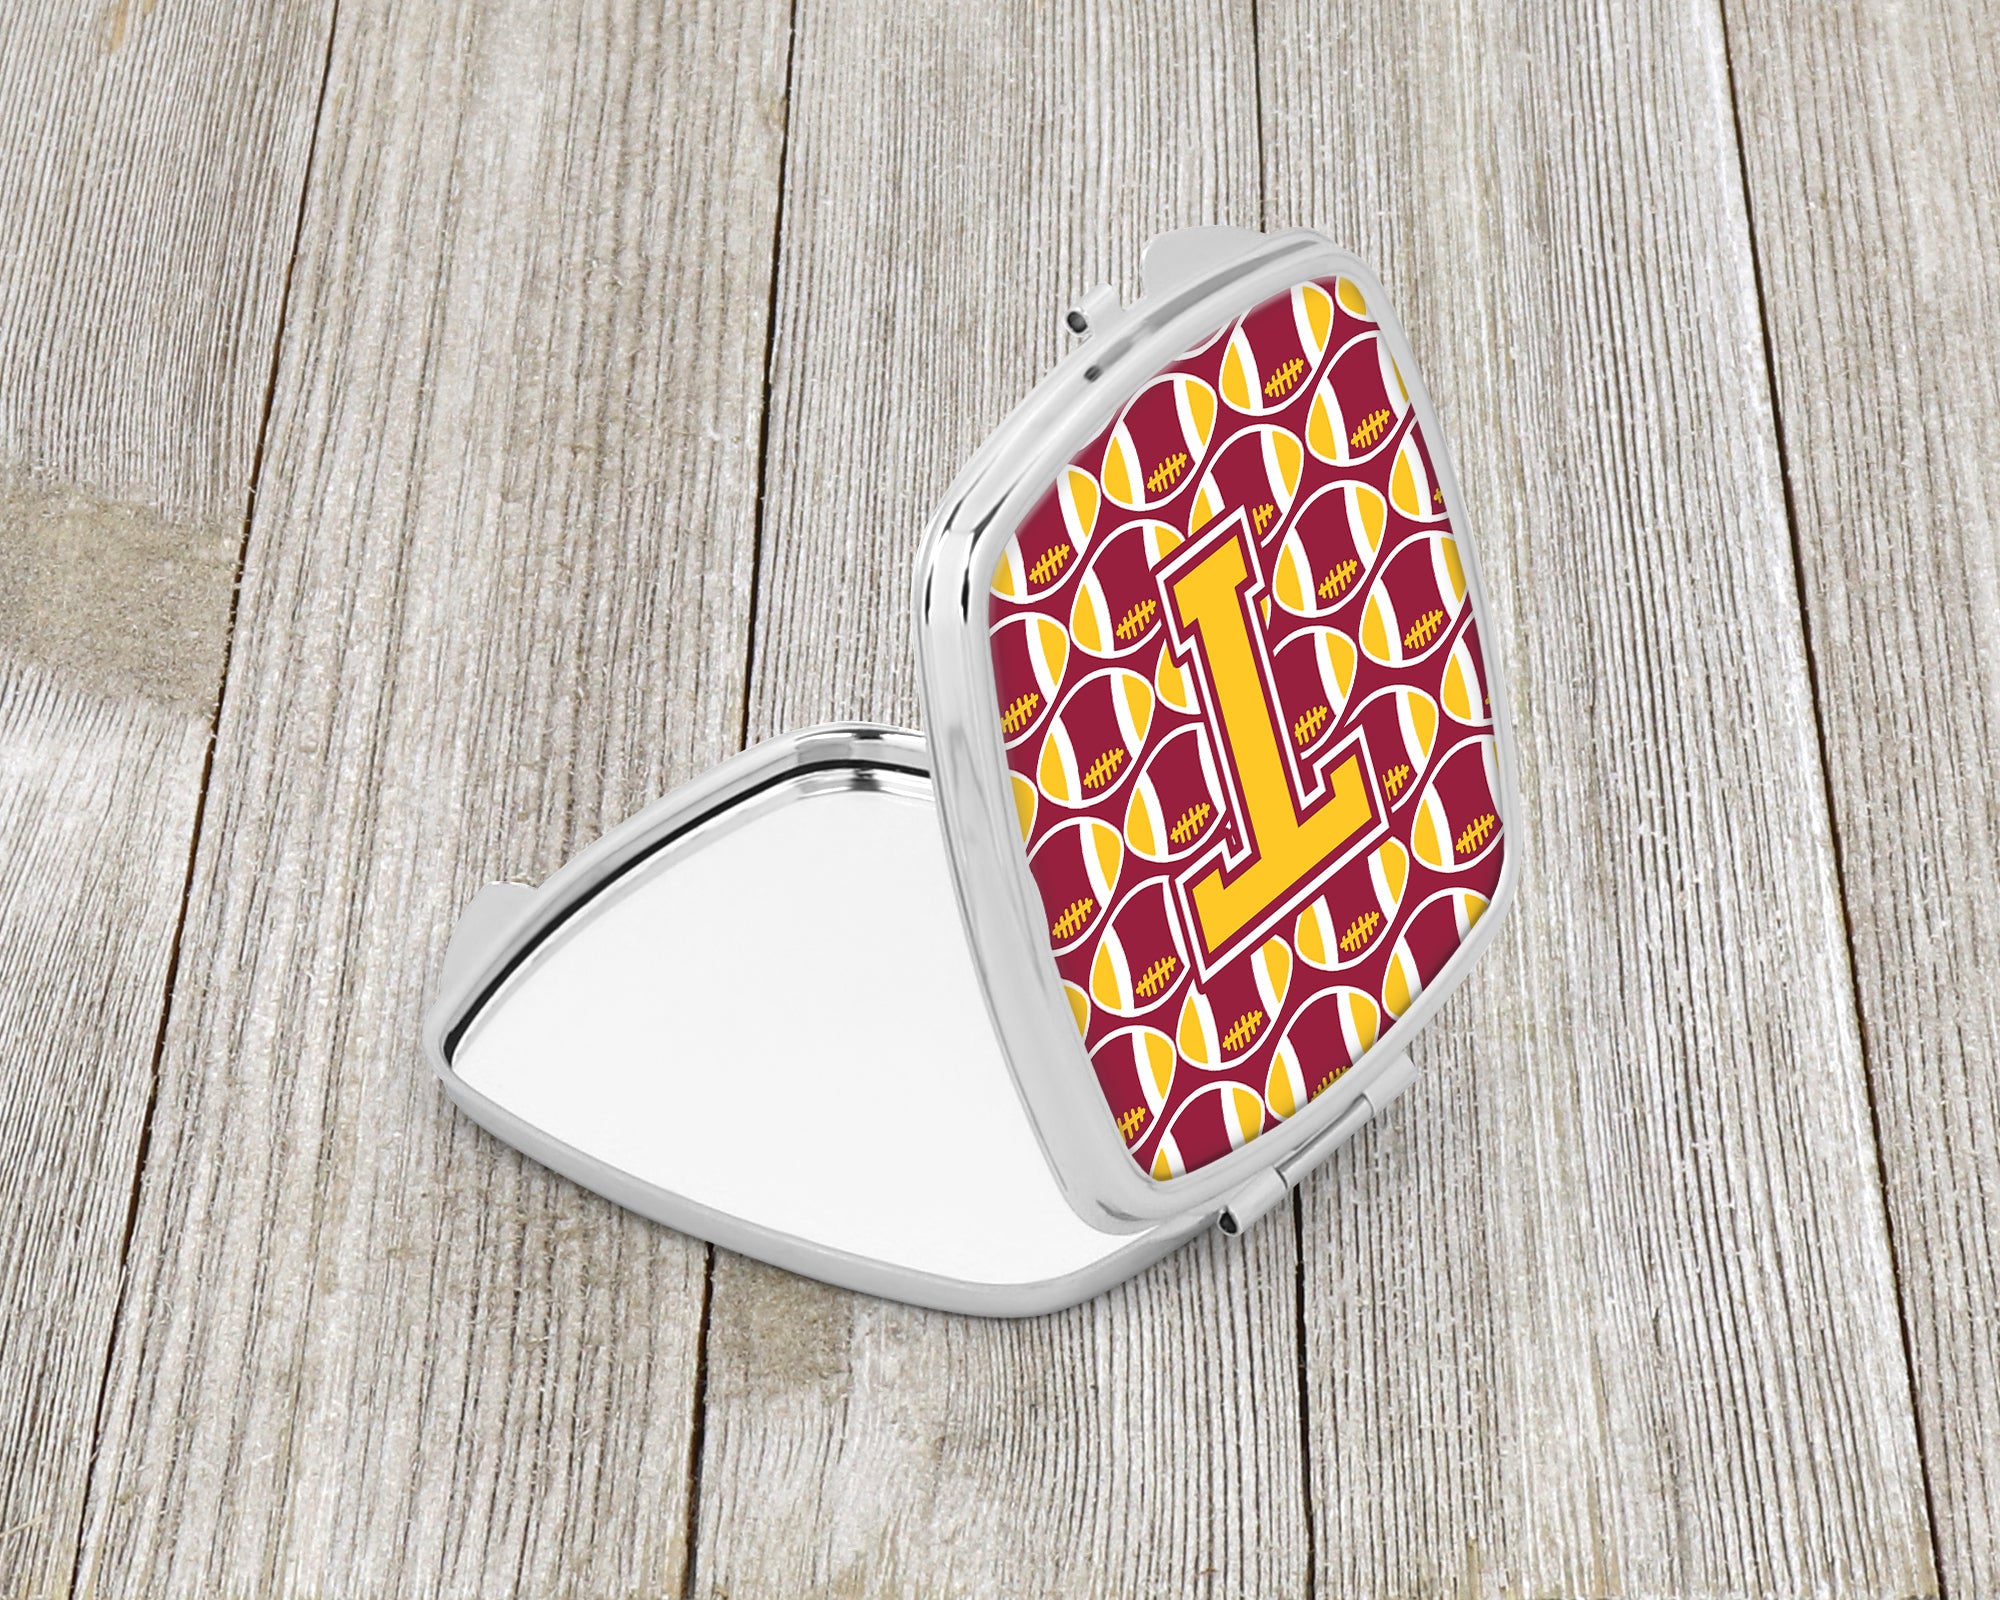 Letter T Football Maroon and Gold Compact Mirror CJ1081-TSCM  the-store.com.